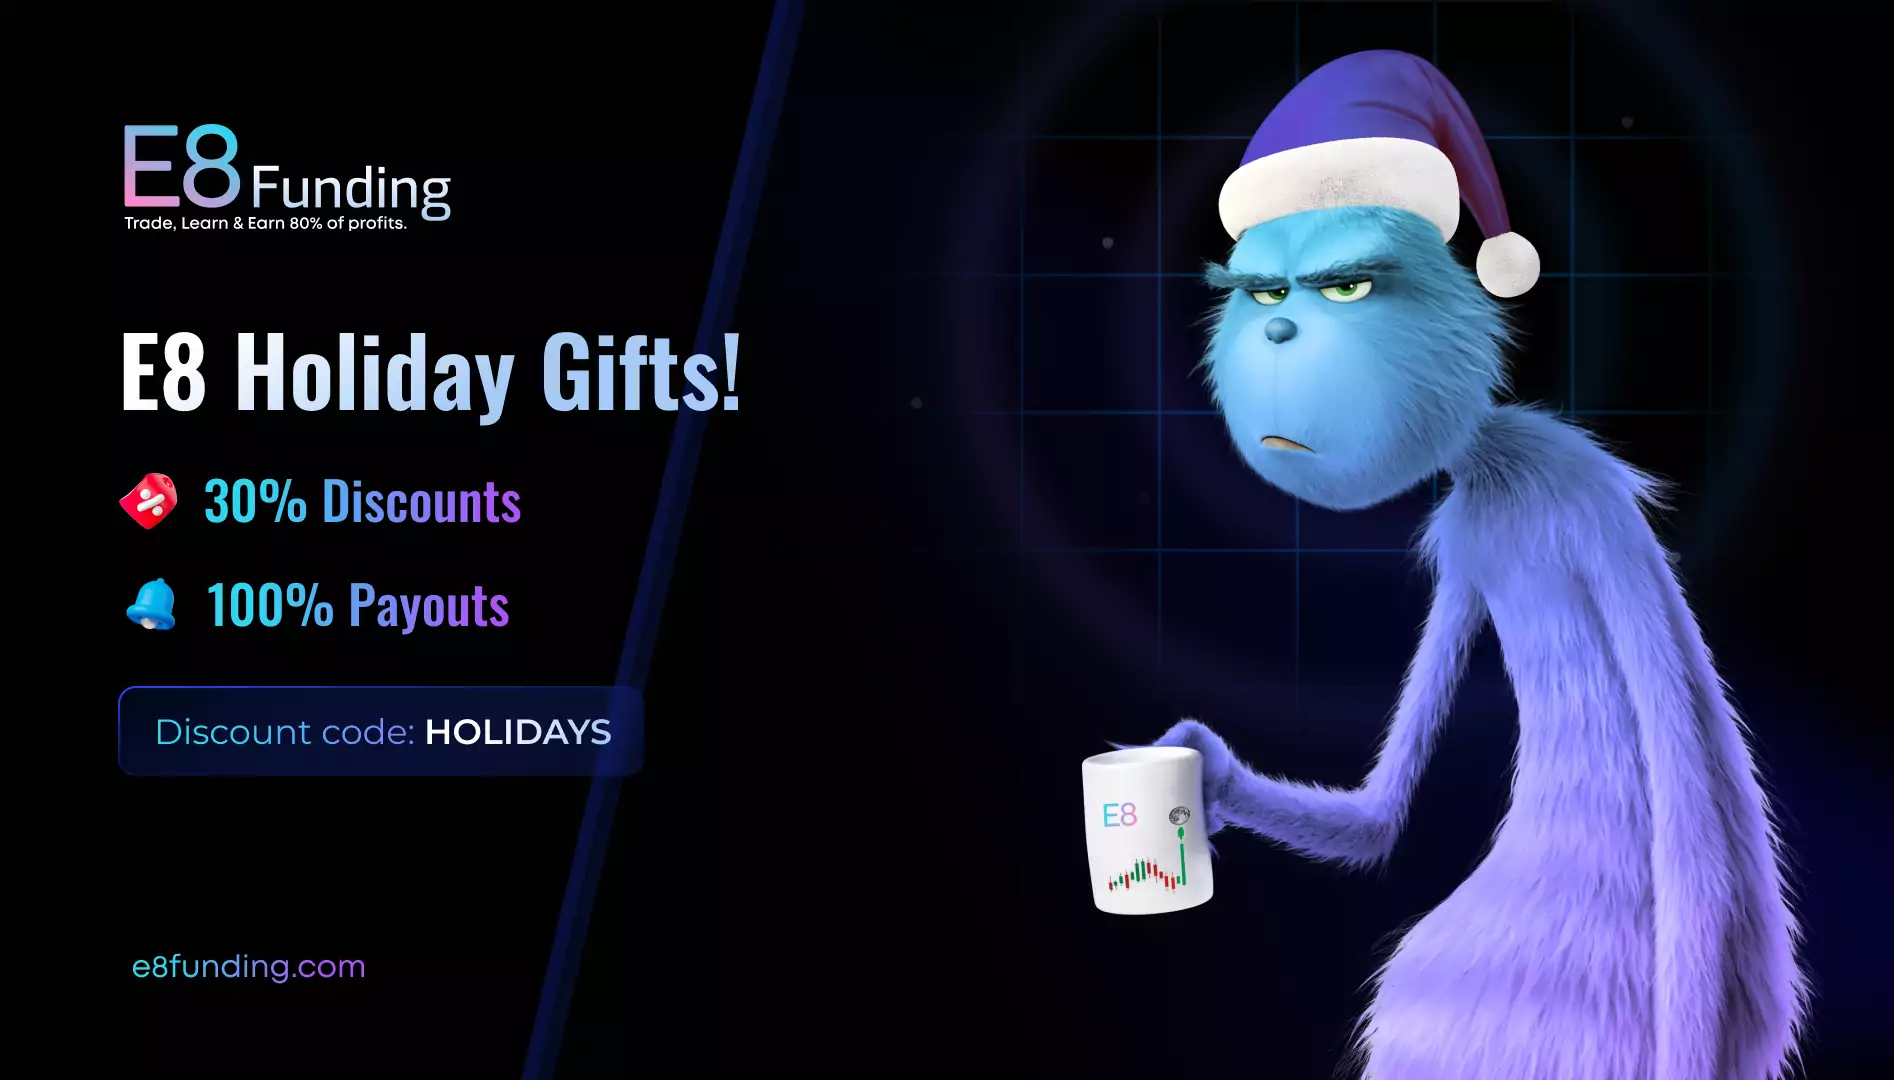 Unwrap Early Holiday Cheer with E8’s Festive Trading Discounts!